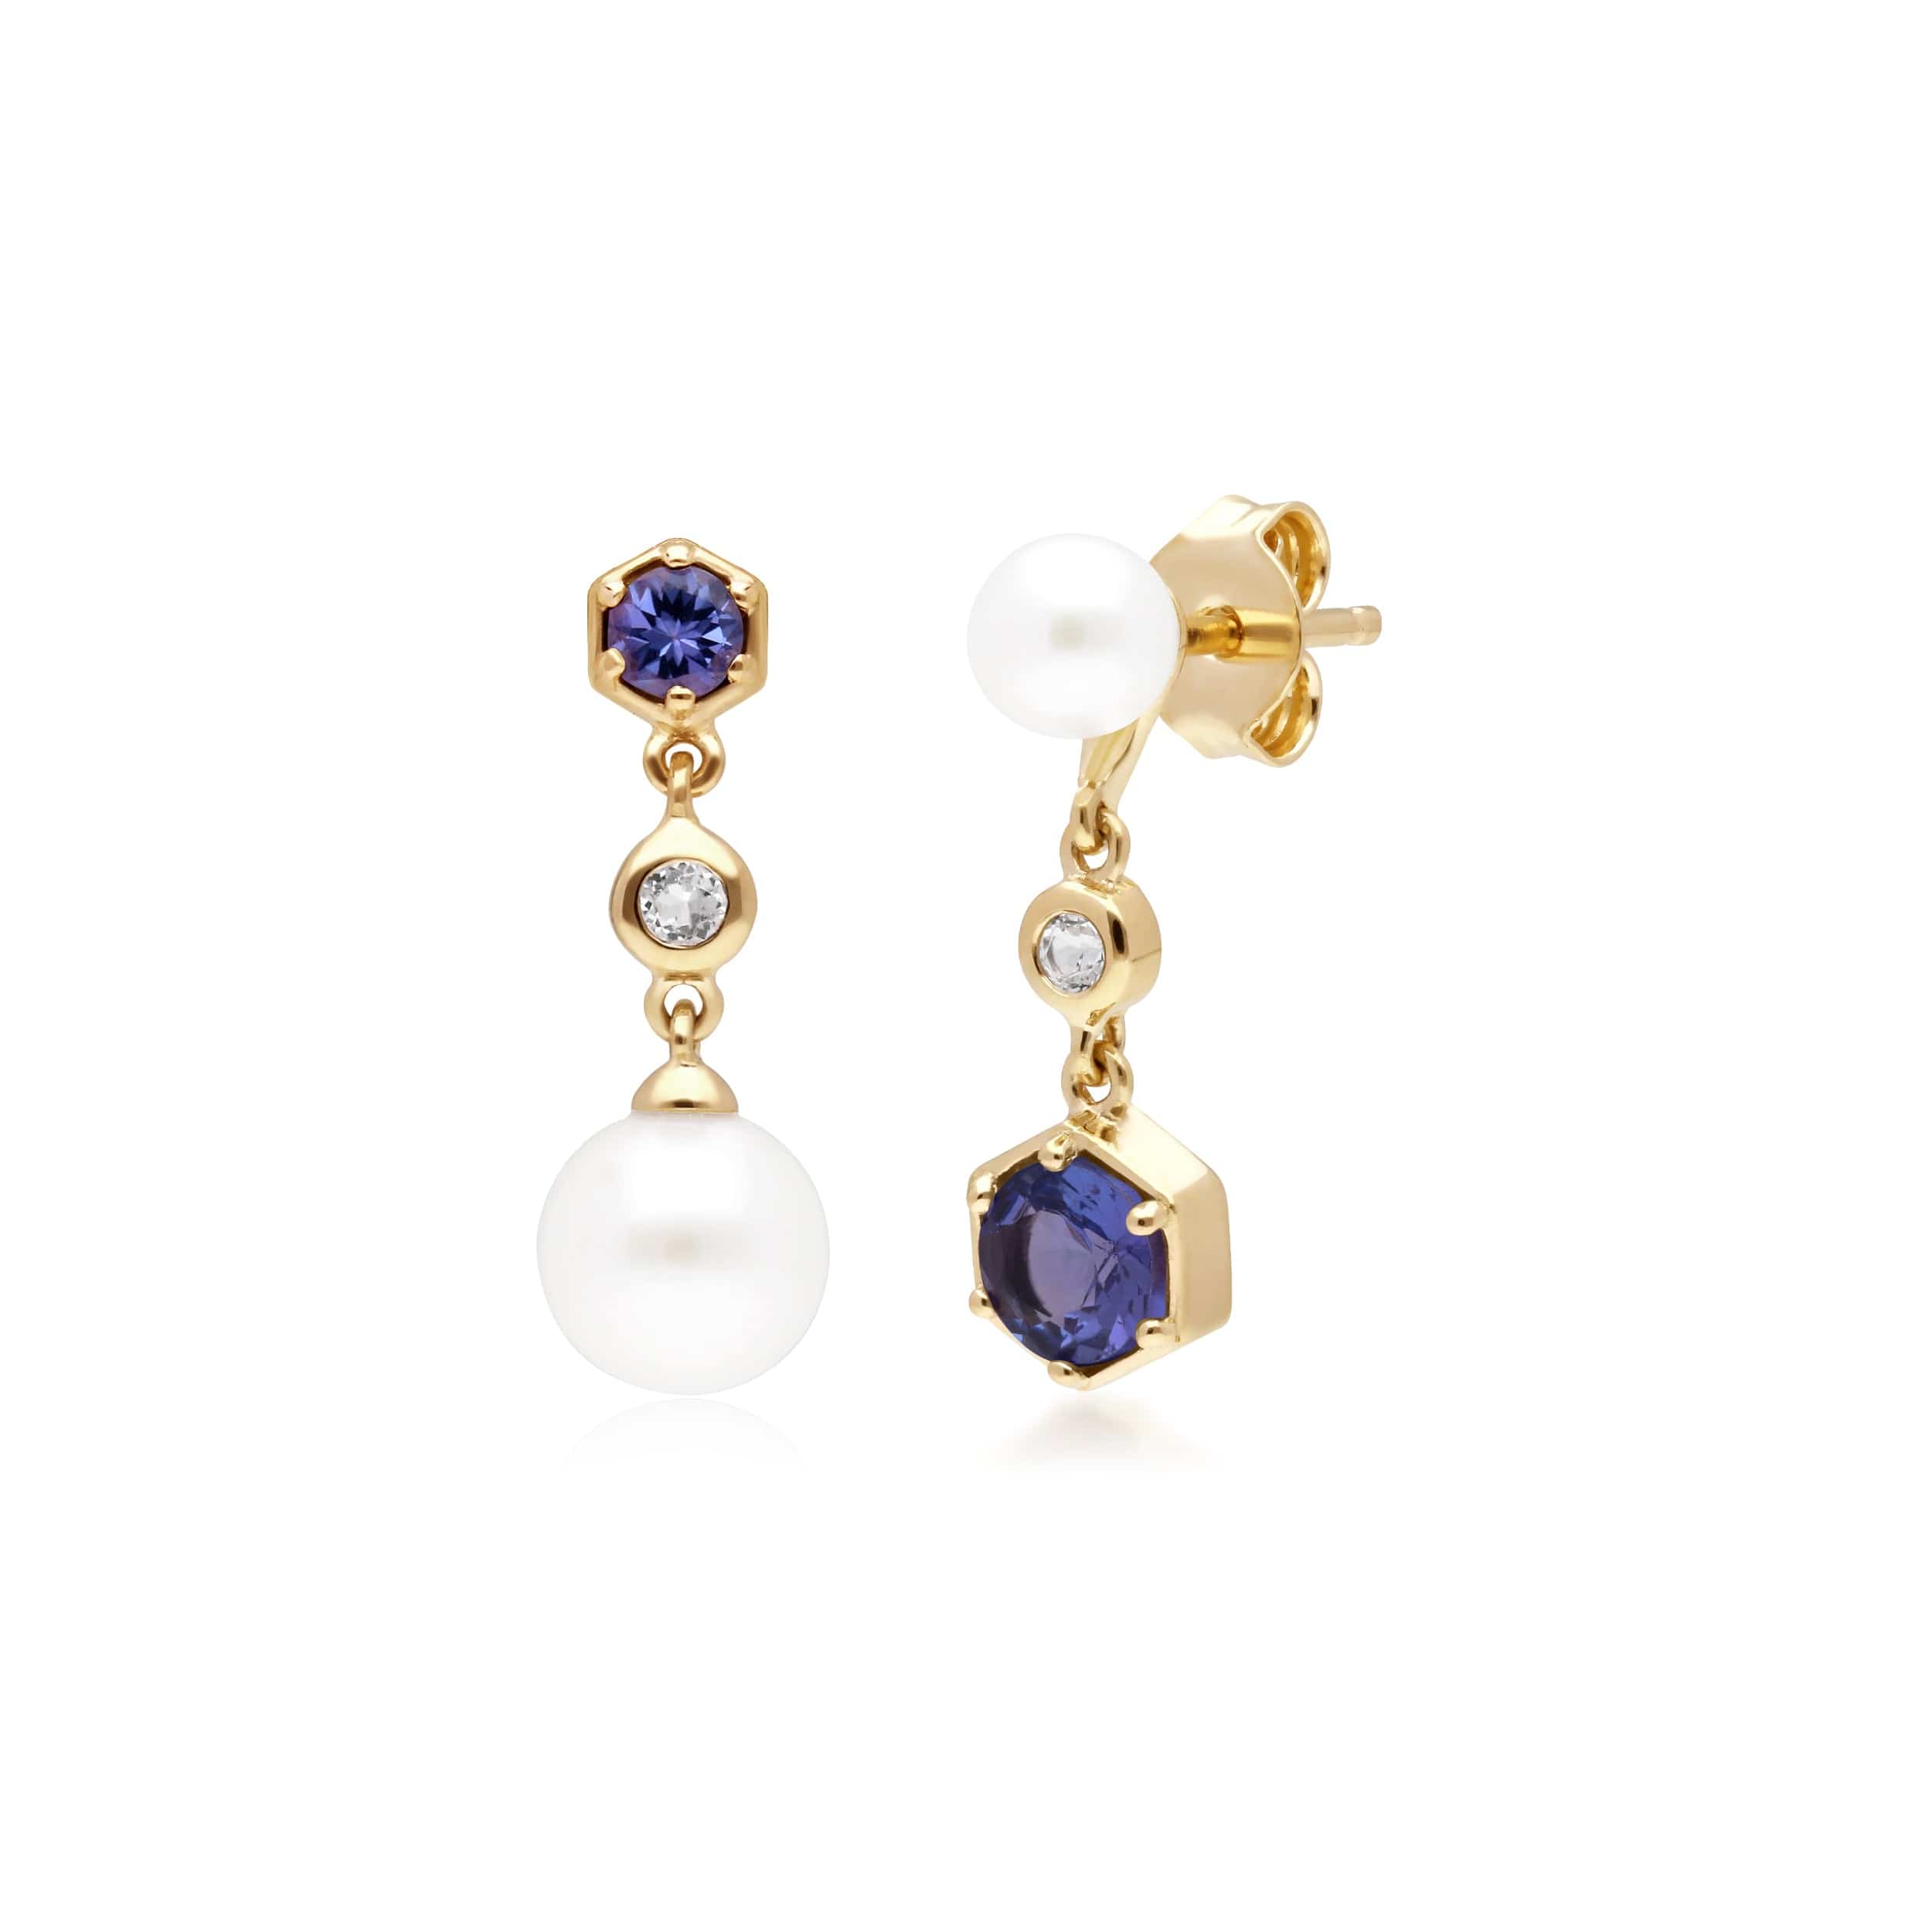 Modern Pearl, Tanzanite & Topaz Mismatched Drop Earrings in Gold Plated Sterling Silver